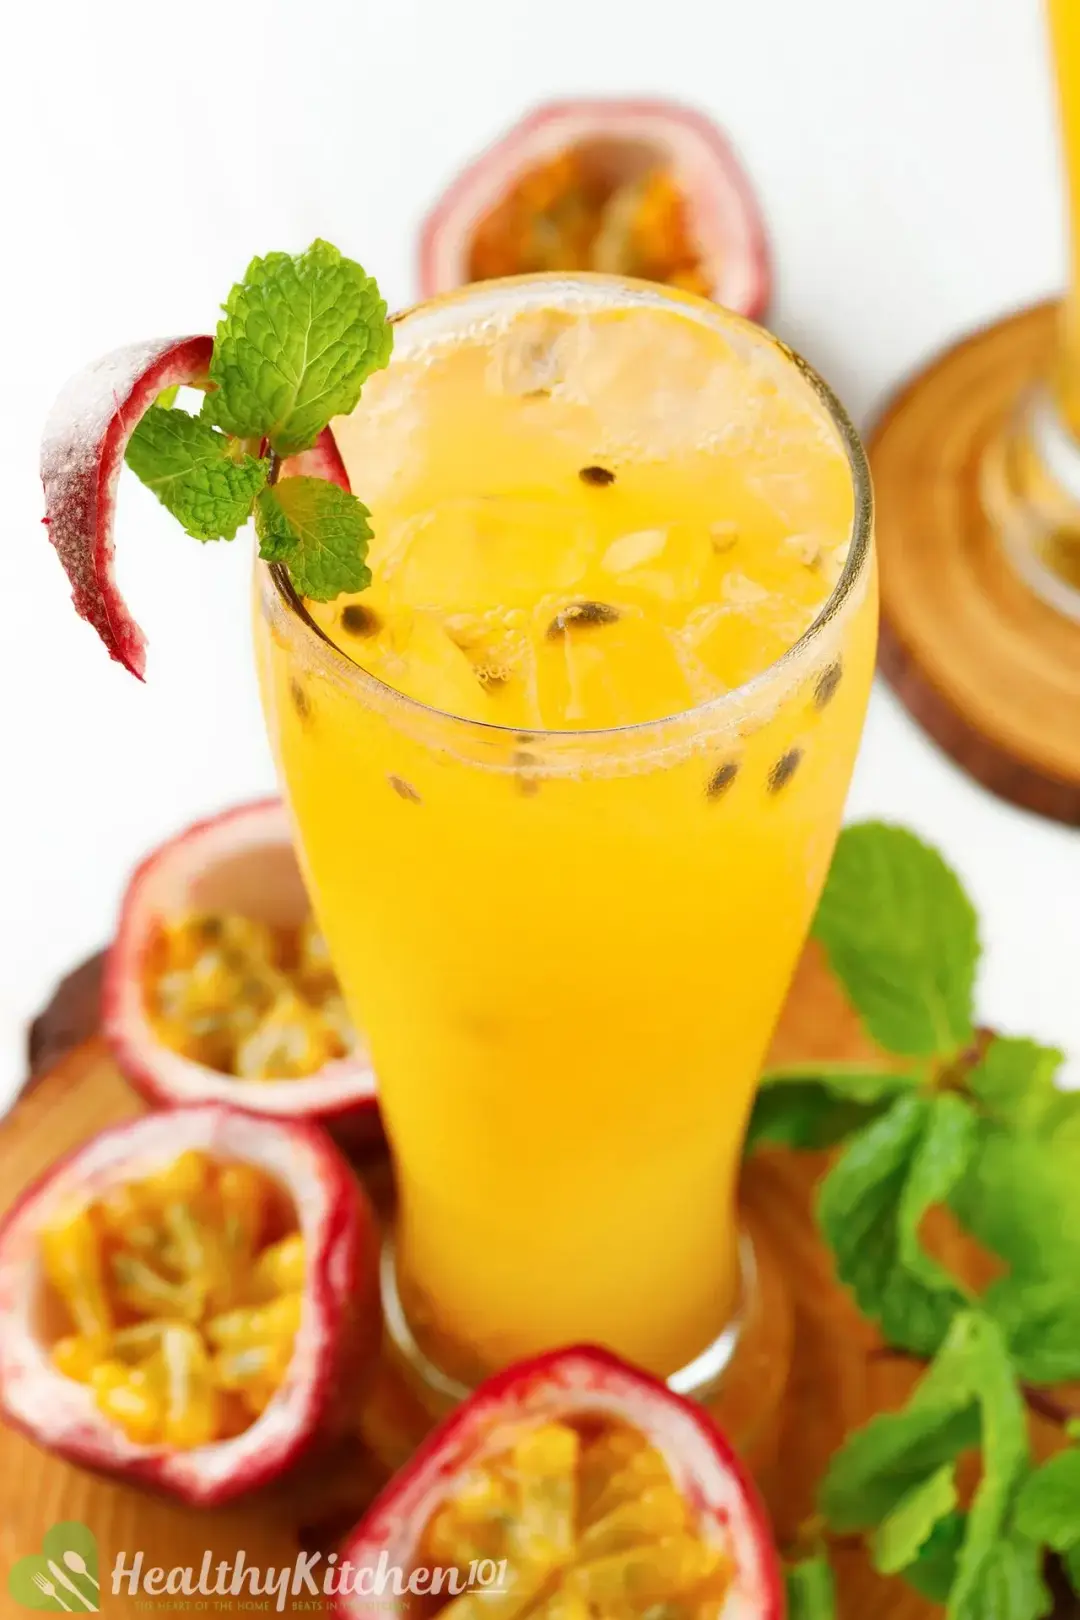 A glass of passion fruit juice with seeds and ice, next to mint leaves and halved passion fruits